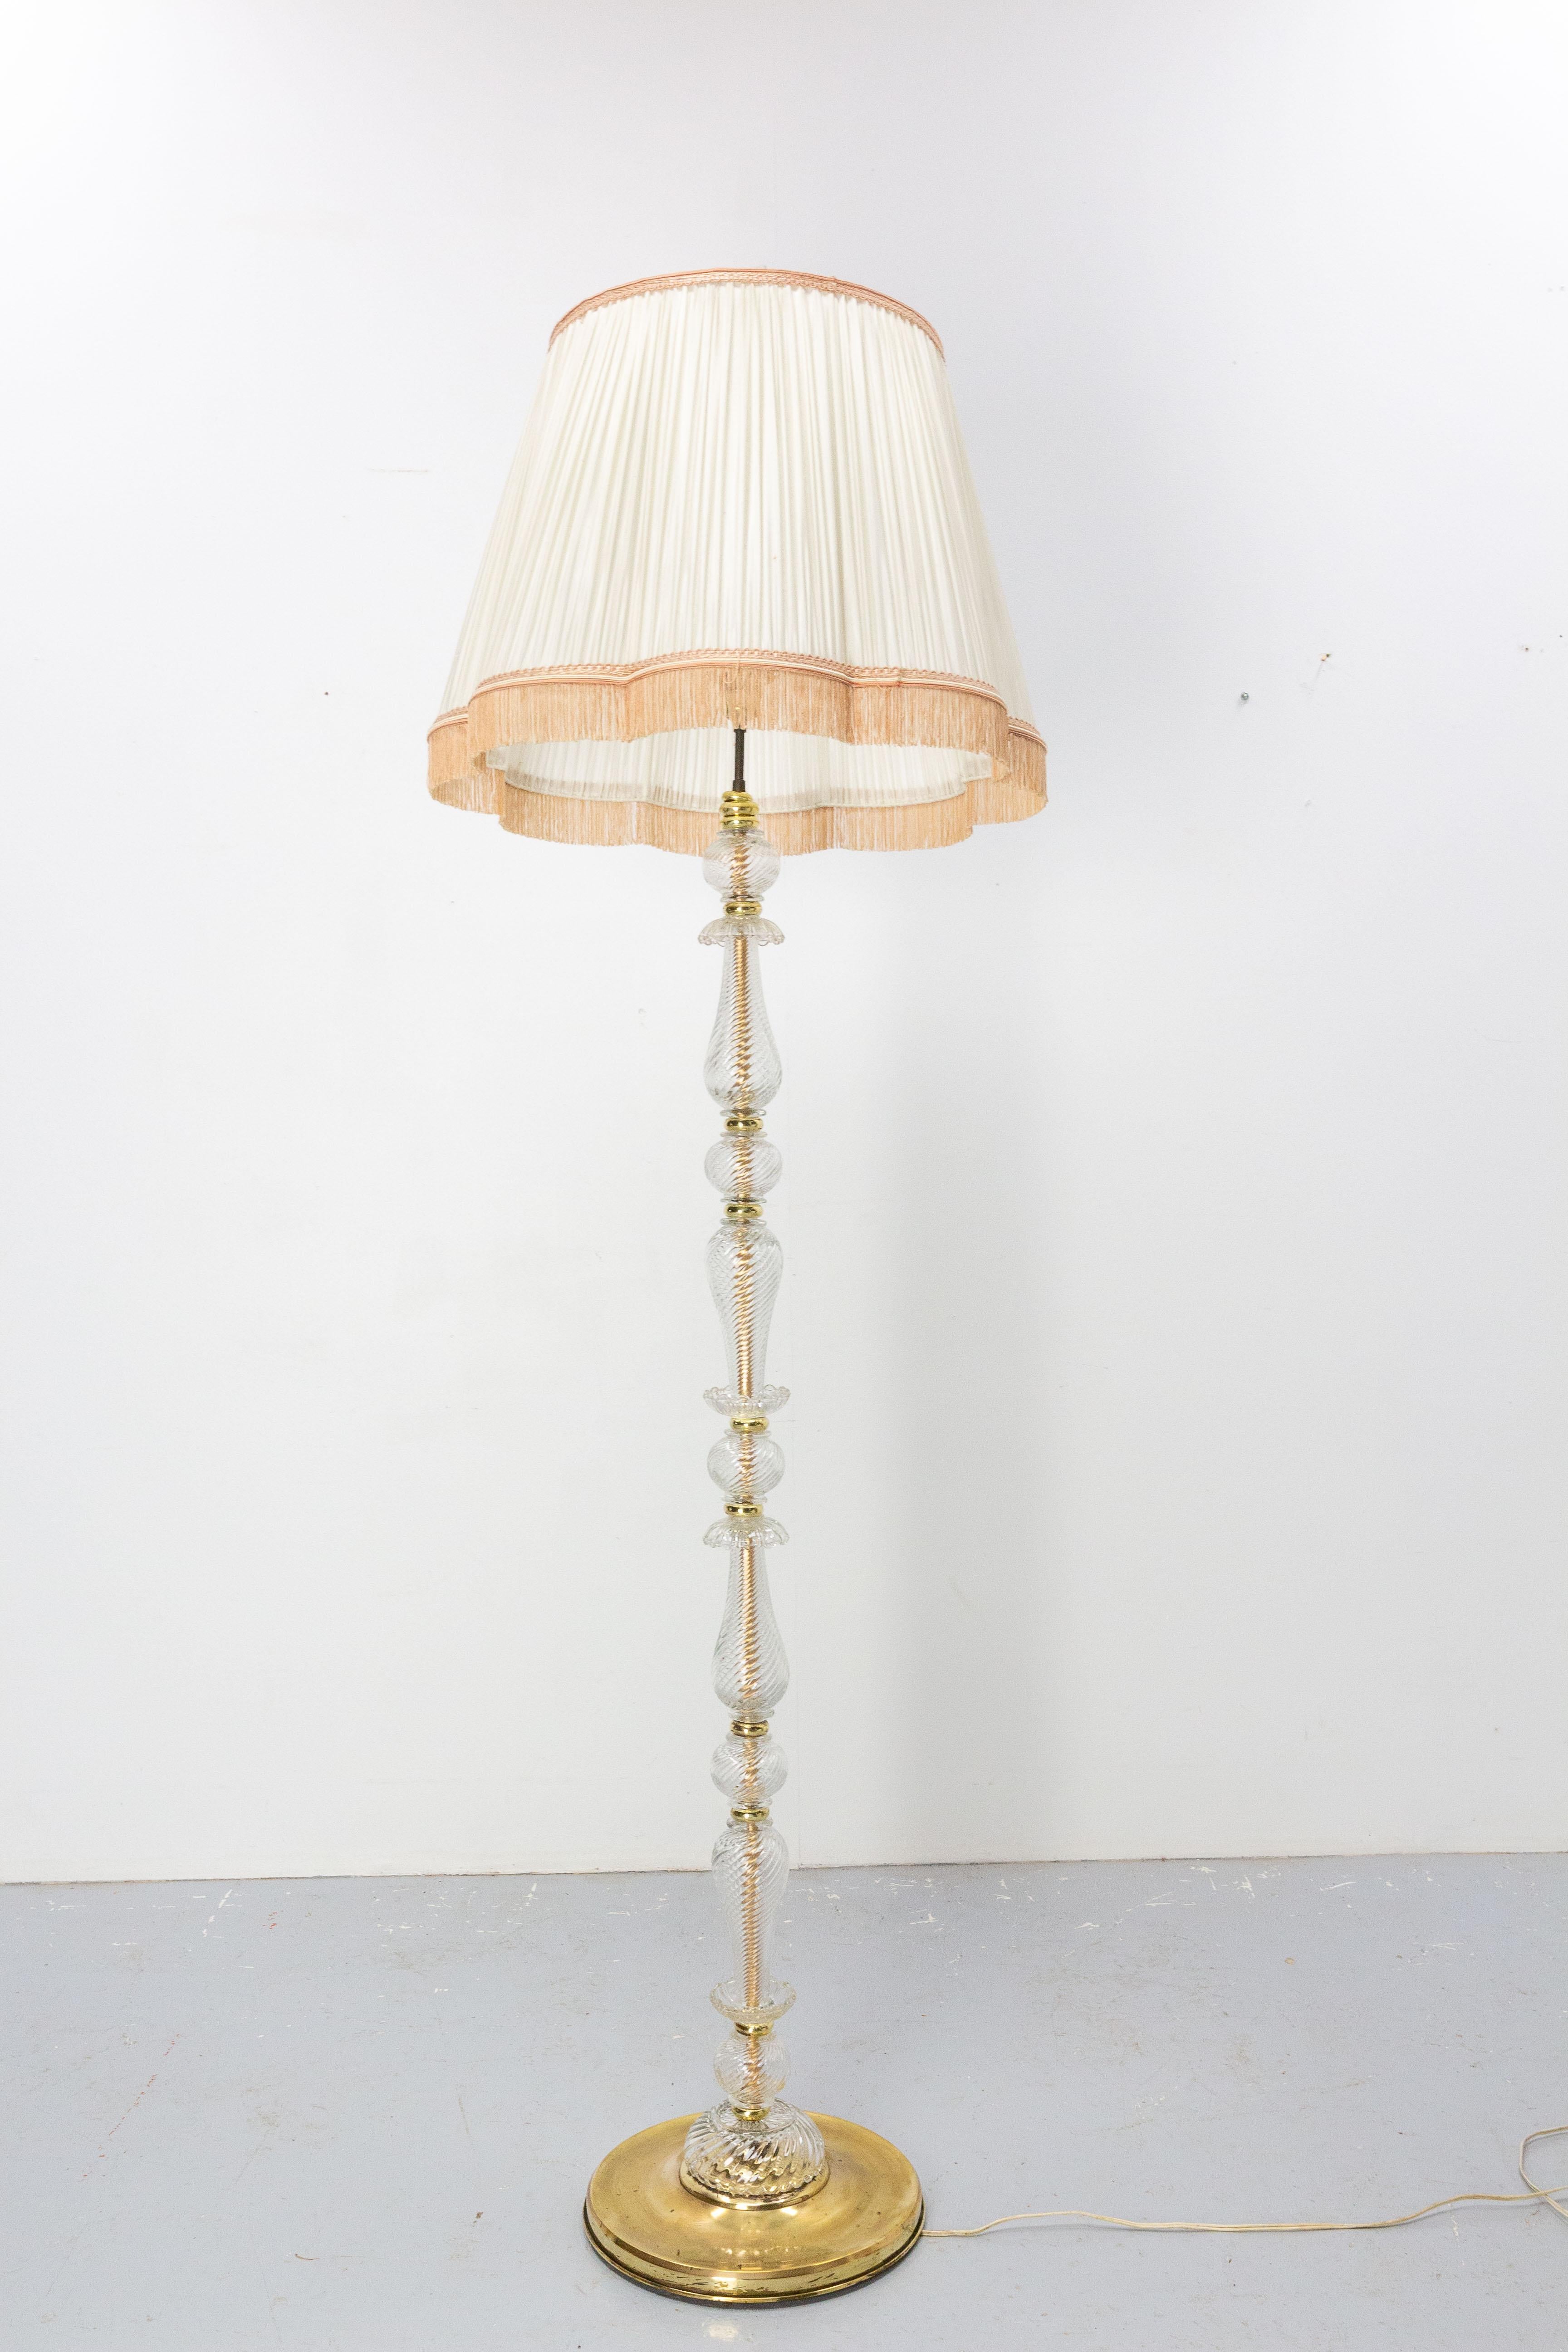 Brass and glass in the Murano style floor lamp light lantern French mid-century, circa 1960.
Sold without the lampshade.
Good vintage condition with only minor signs of use for its age
This can be re-wired and tested to USA or European and UK